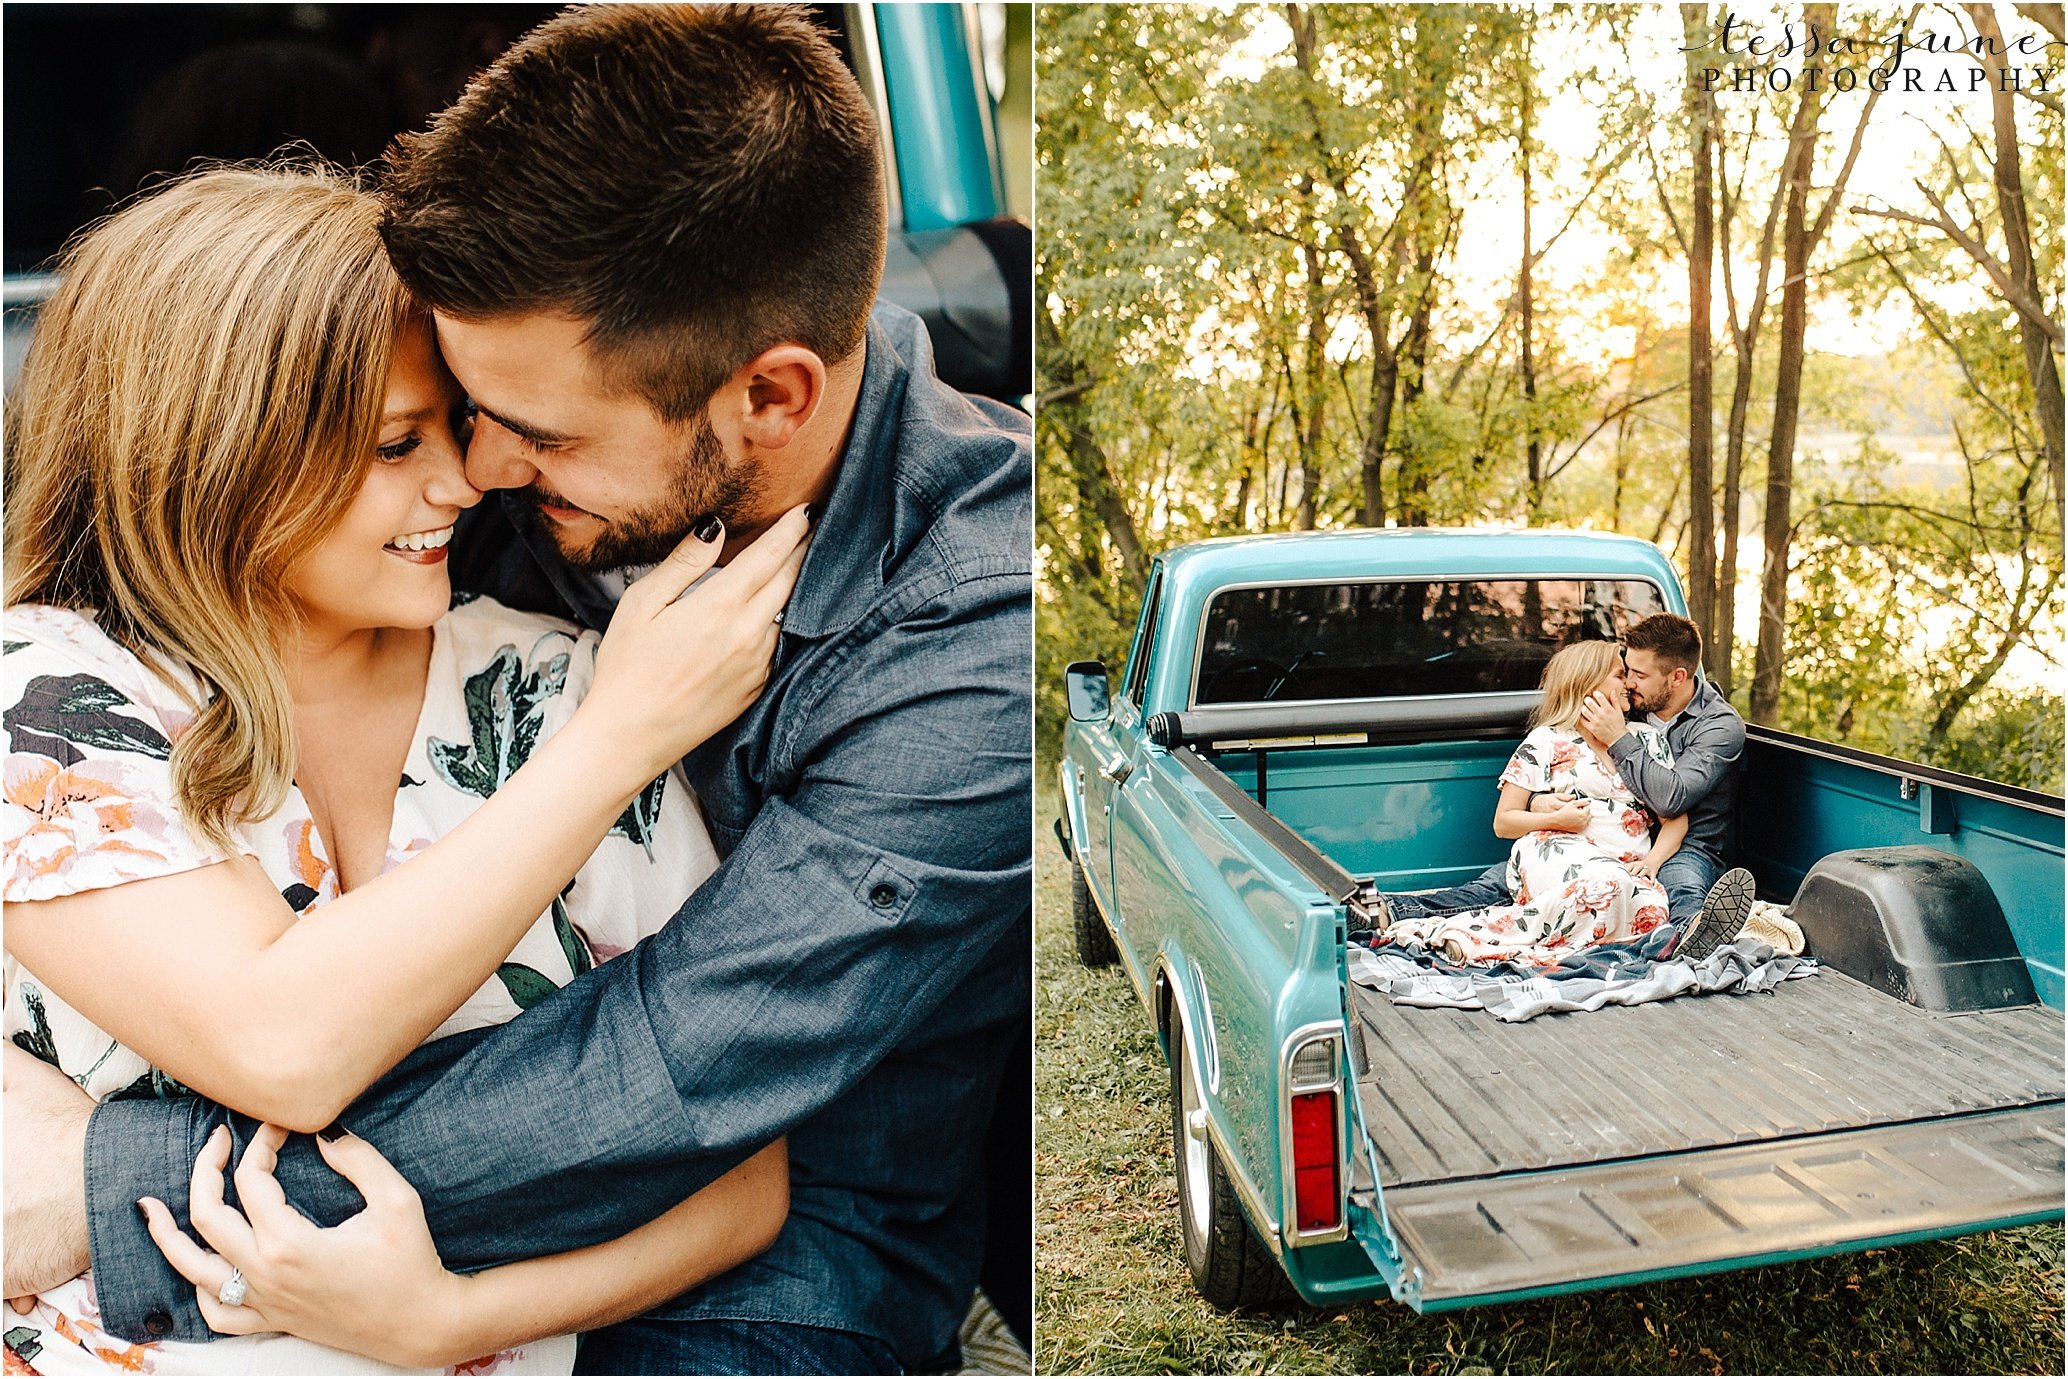 st-cloud-wedding-photographer-engagement-session-with-old-truck-28.jpeg